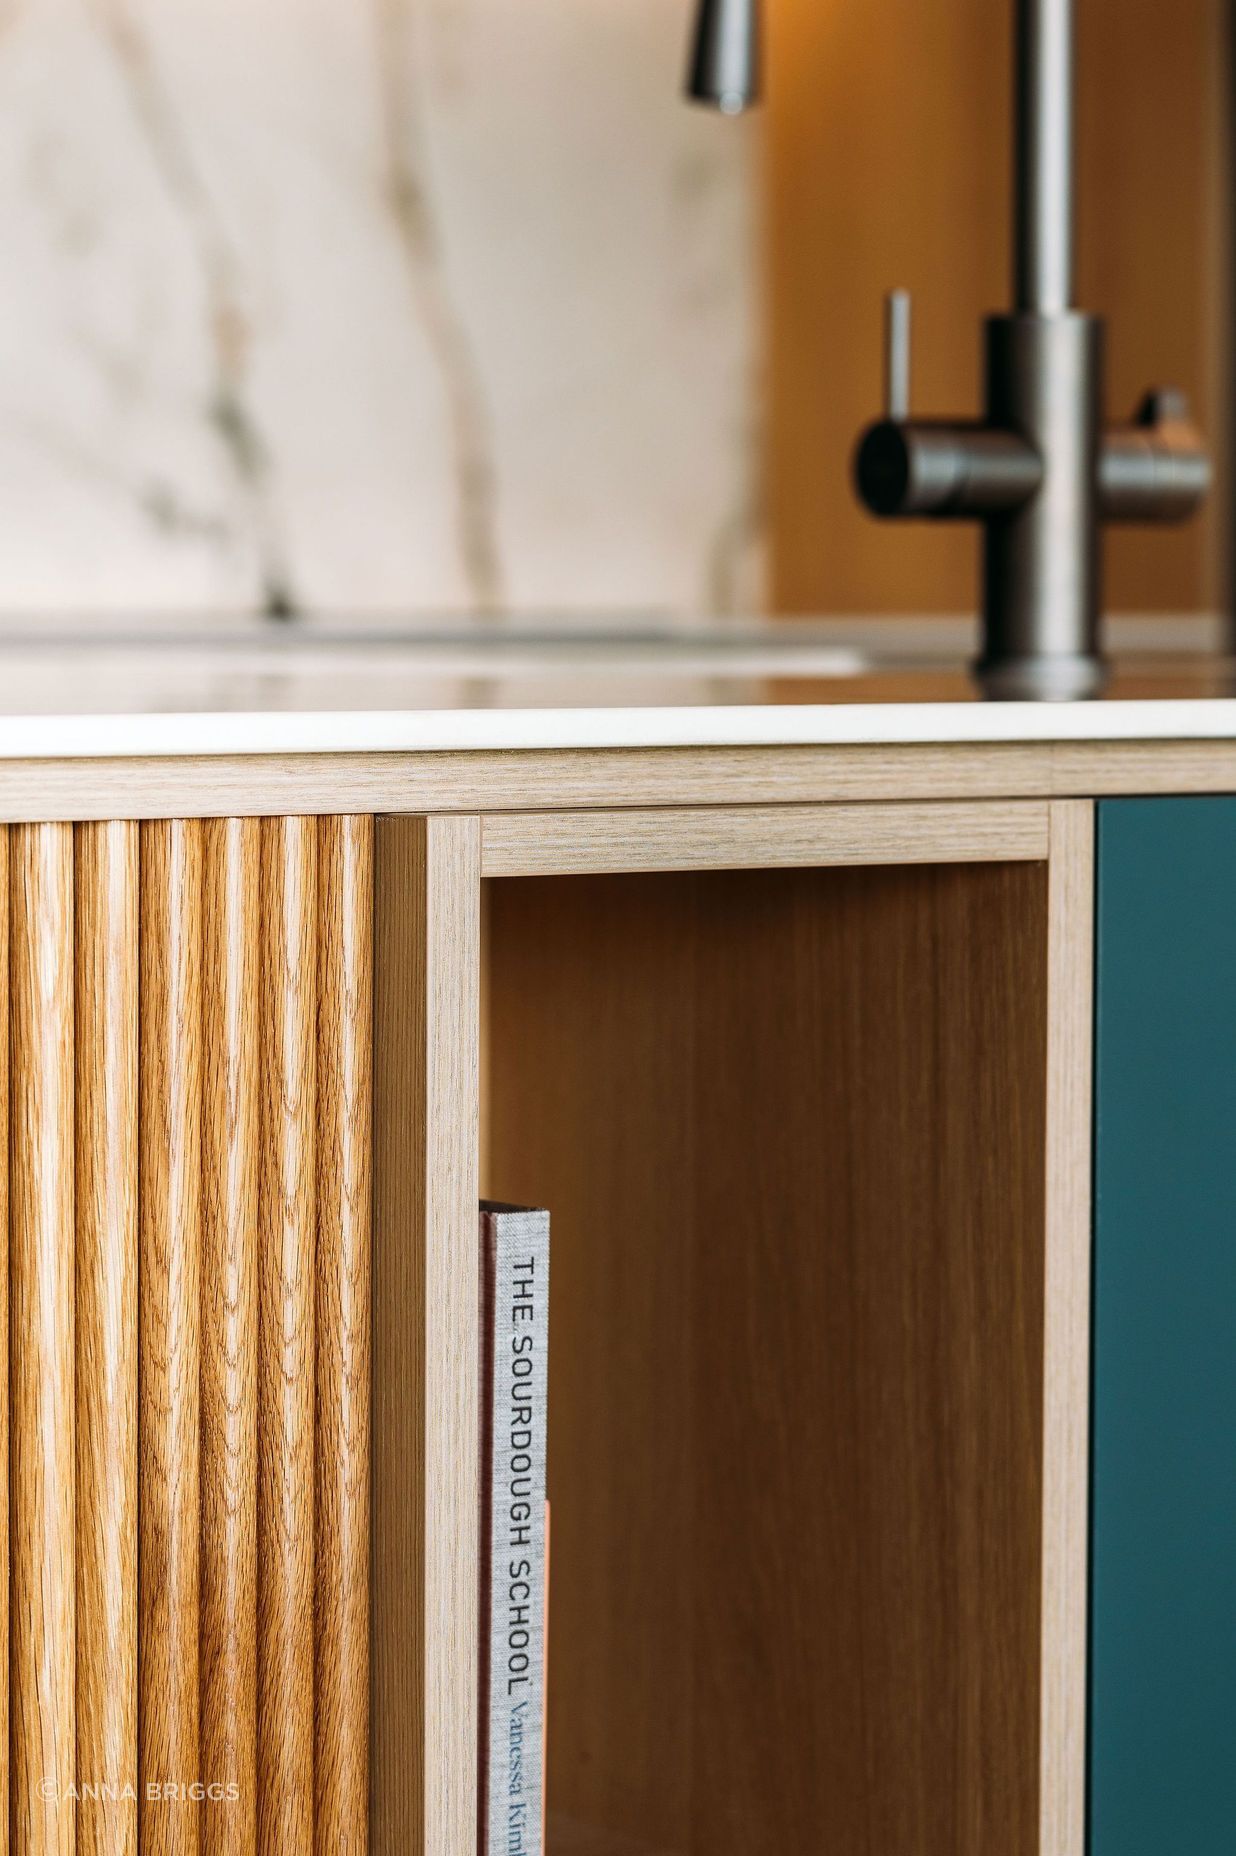 Detailed cabinetry has been expertly manufactured.